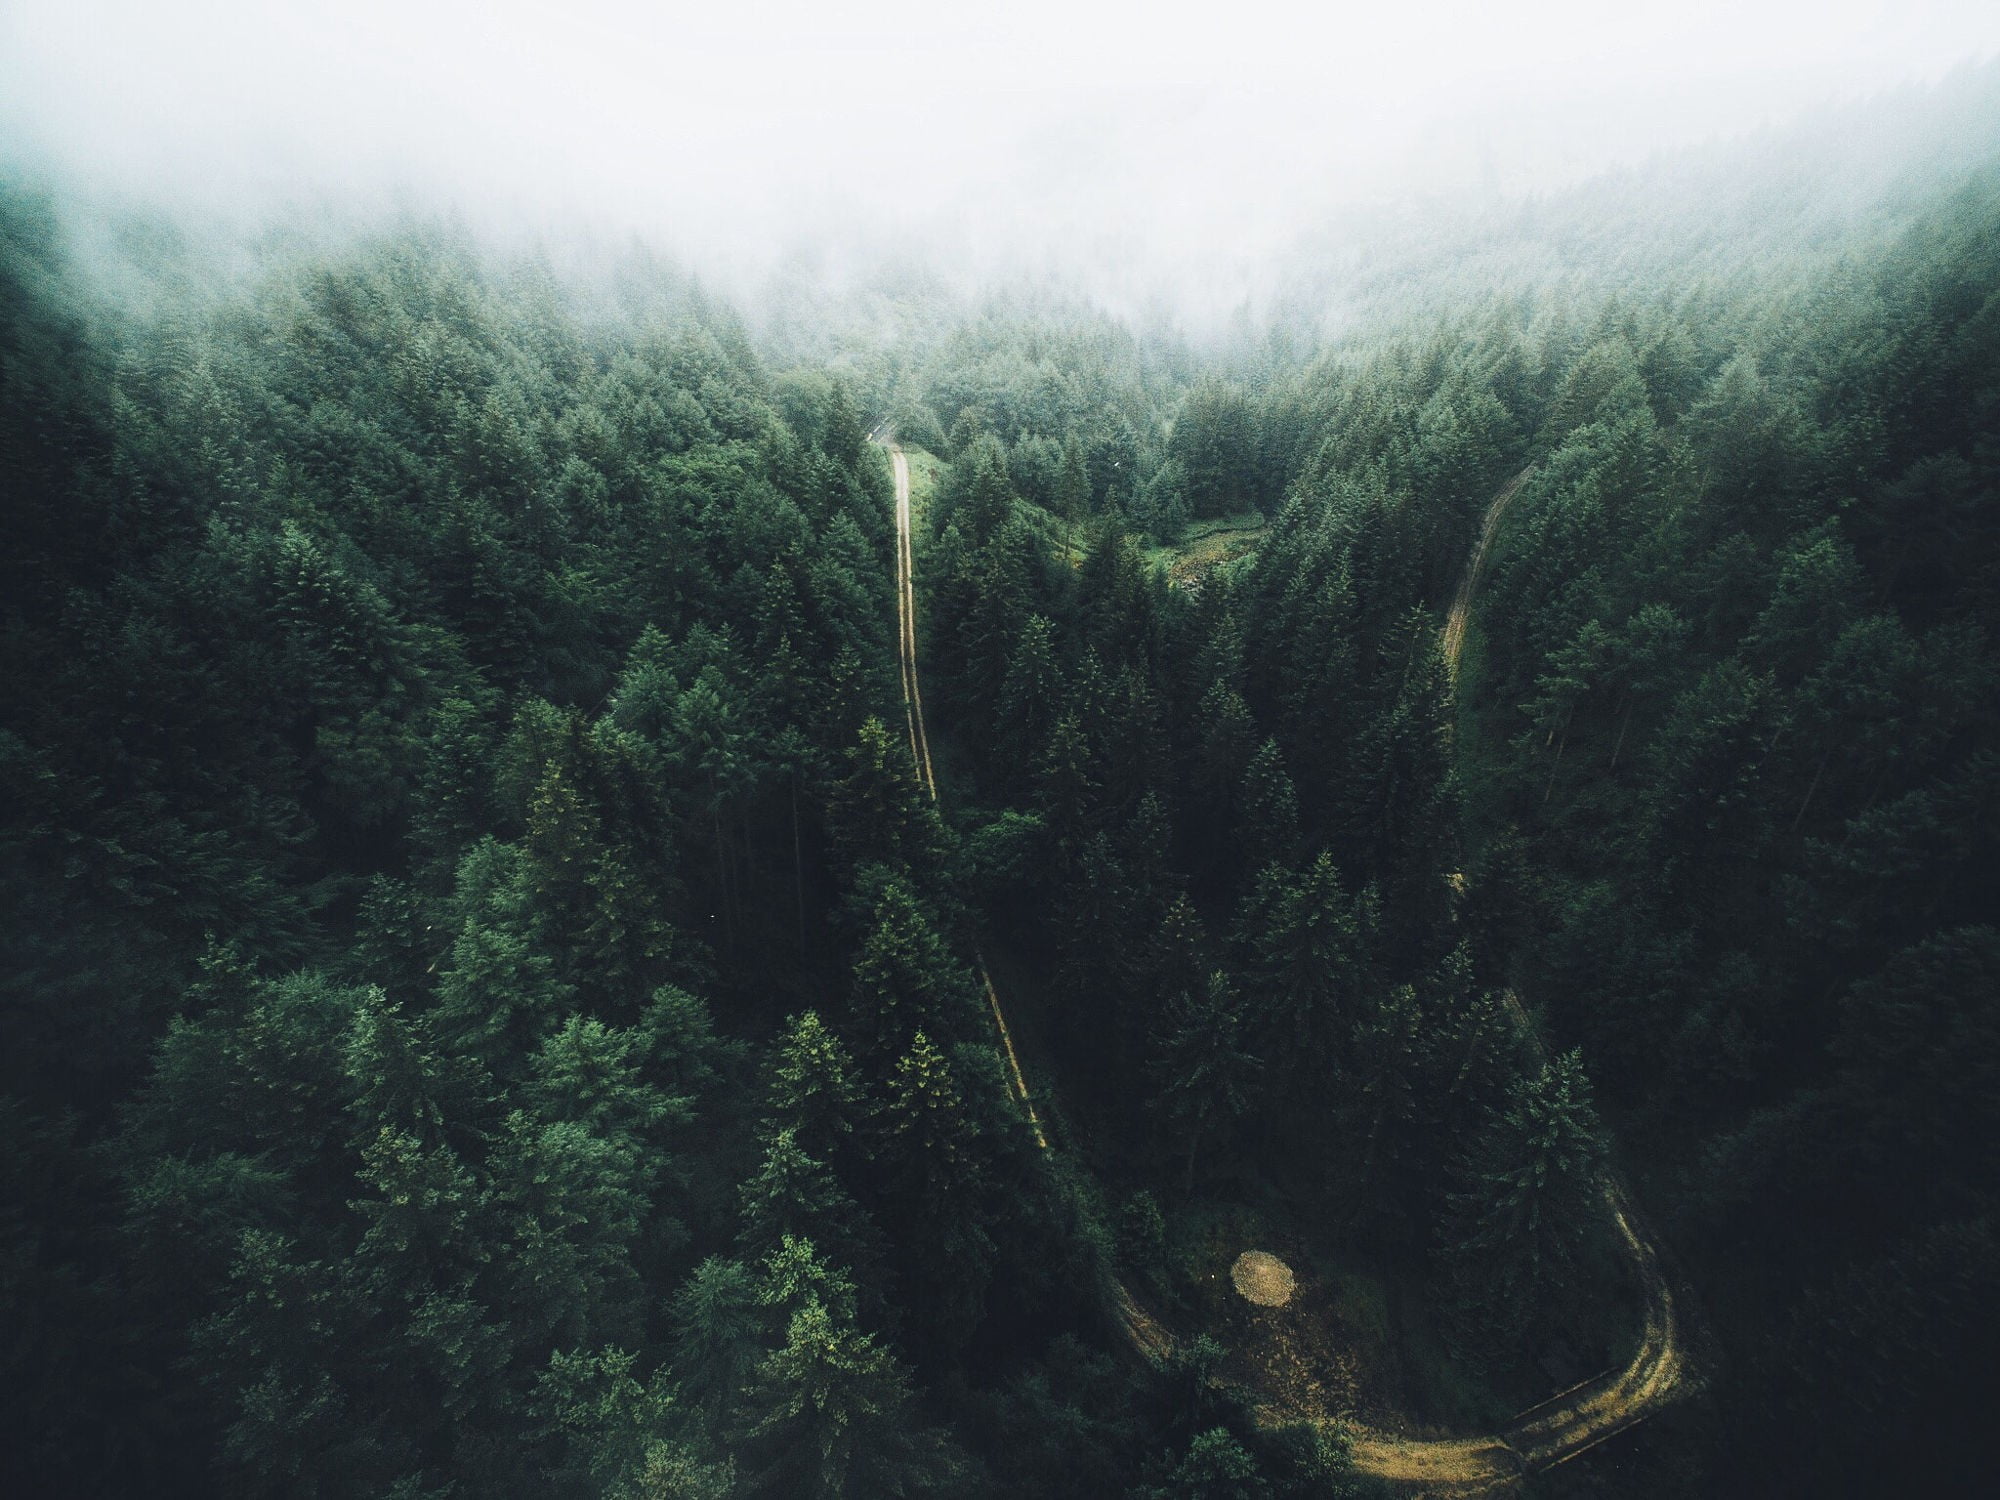 green leafed trees, trees, aerial view, forest, road